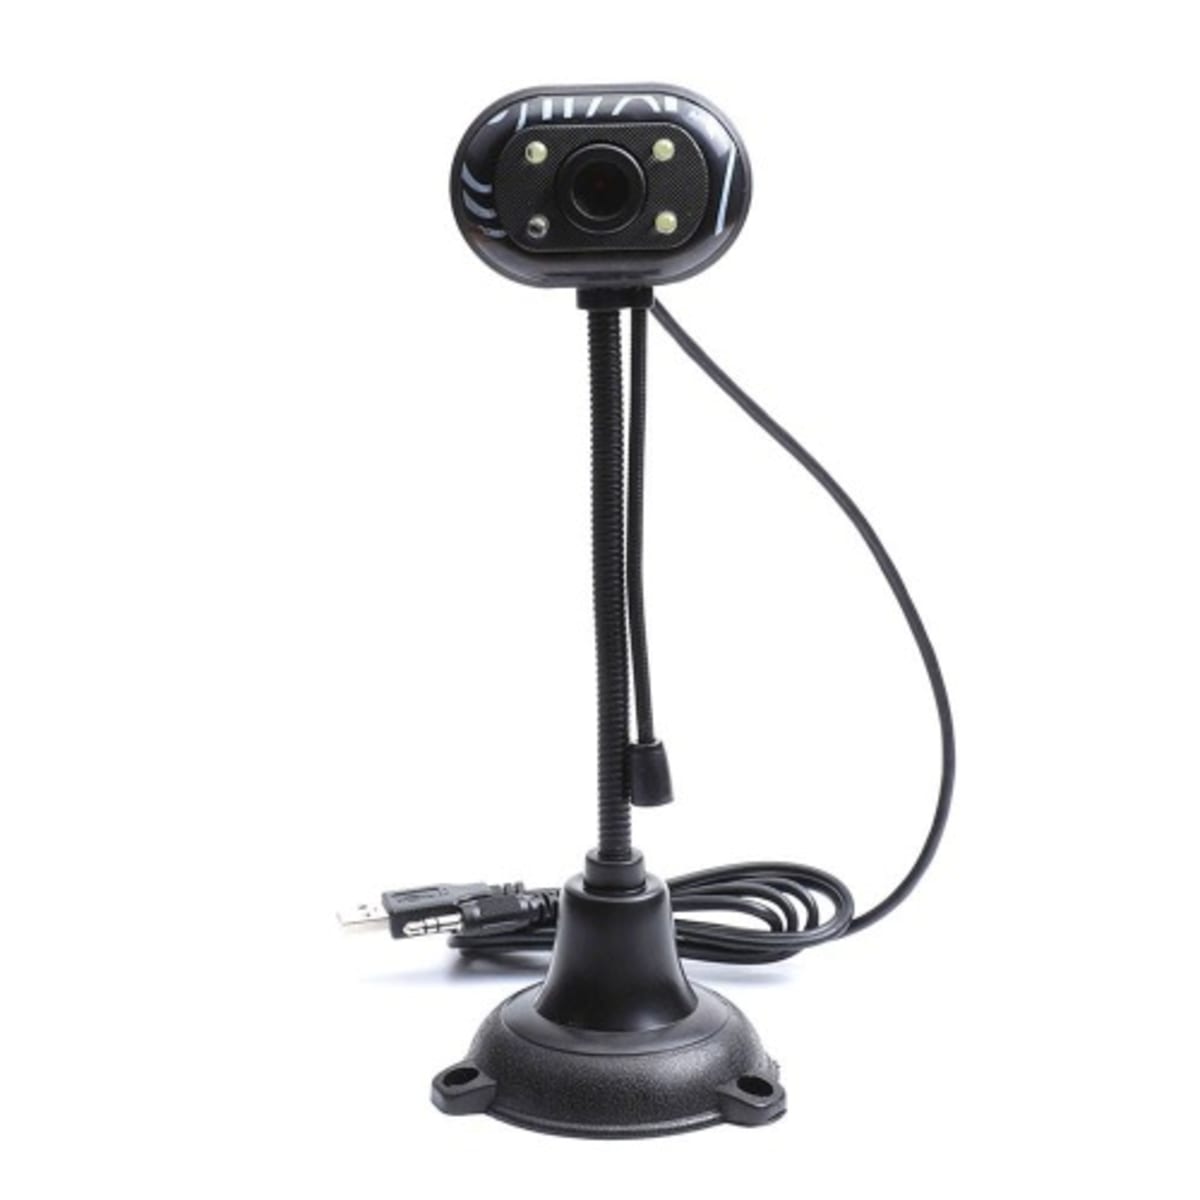 Web Camera USB 2.0 Drive Free Webcam Web Cam with Microphone for